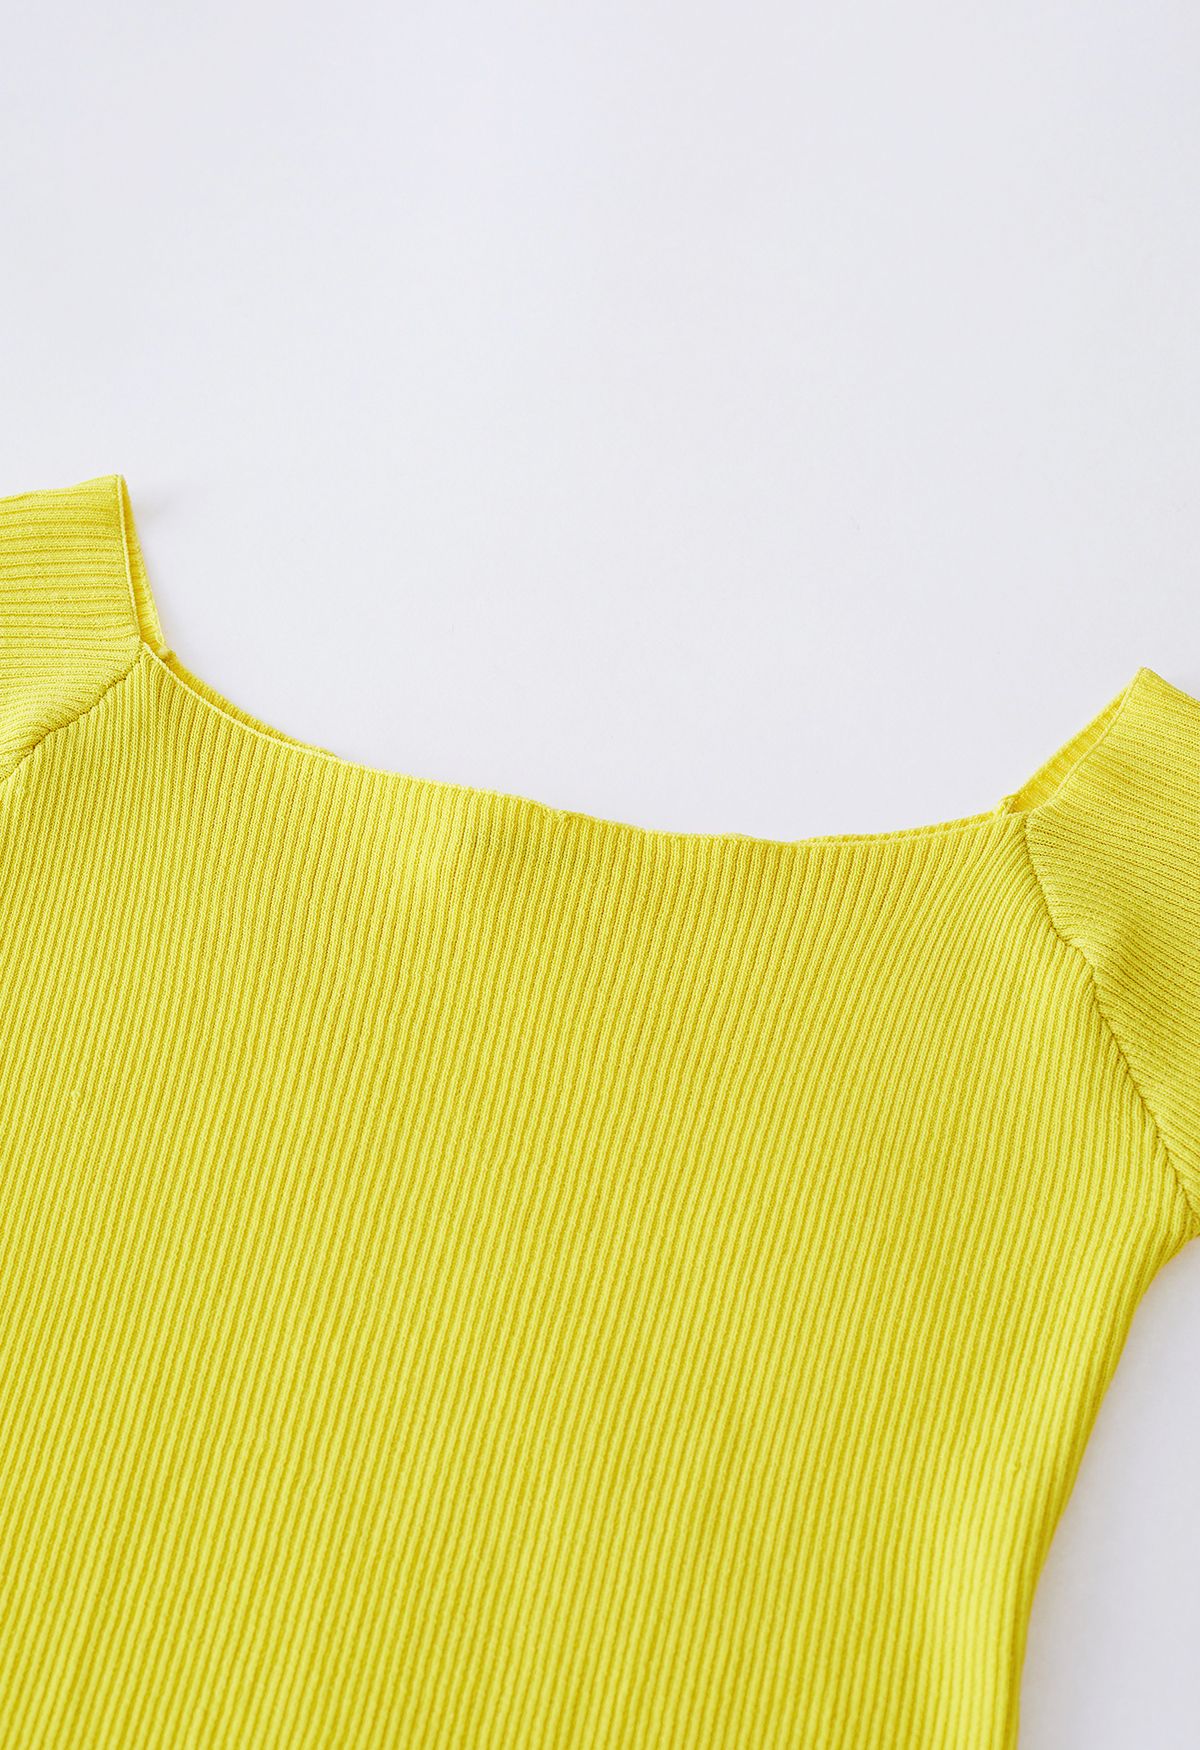 Boat Neck Rib Knit Crop Top in Yellow